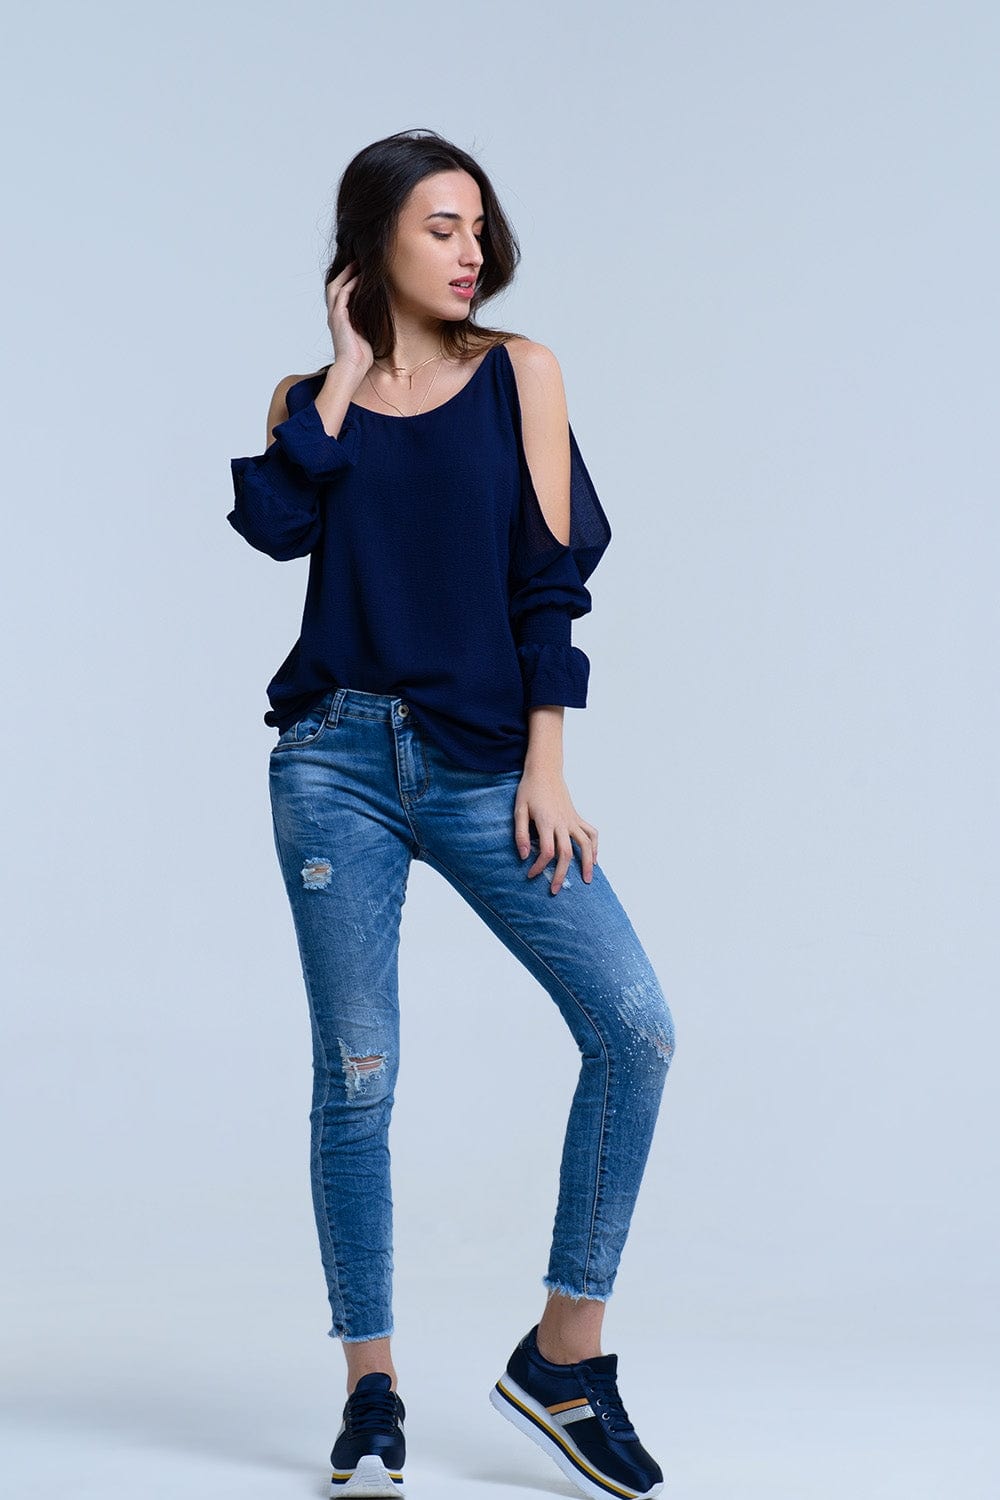 Q2 Women's Jean Jeans with rips details